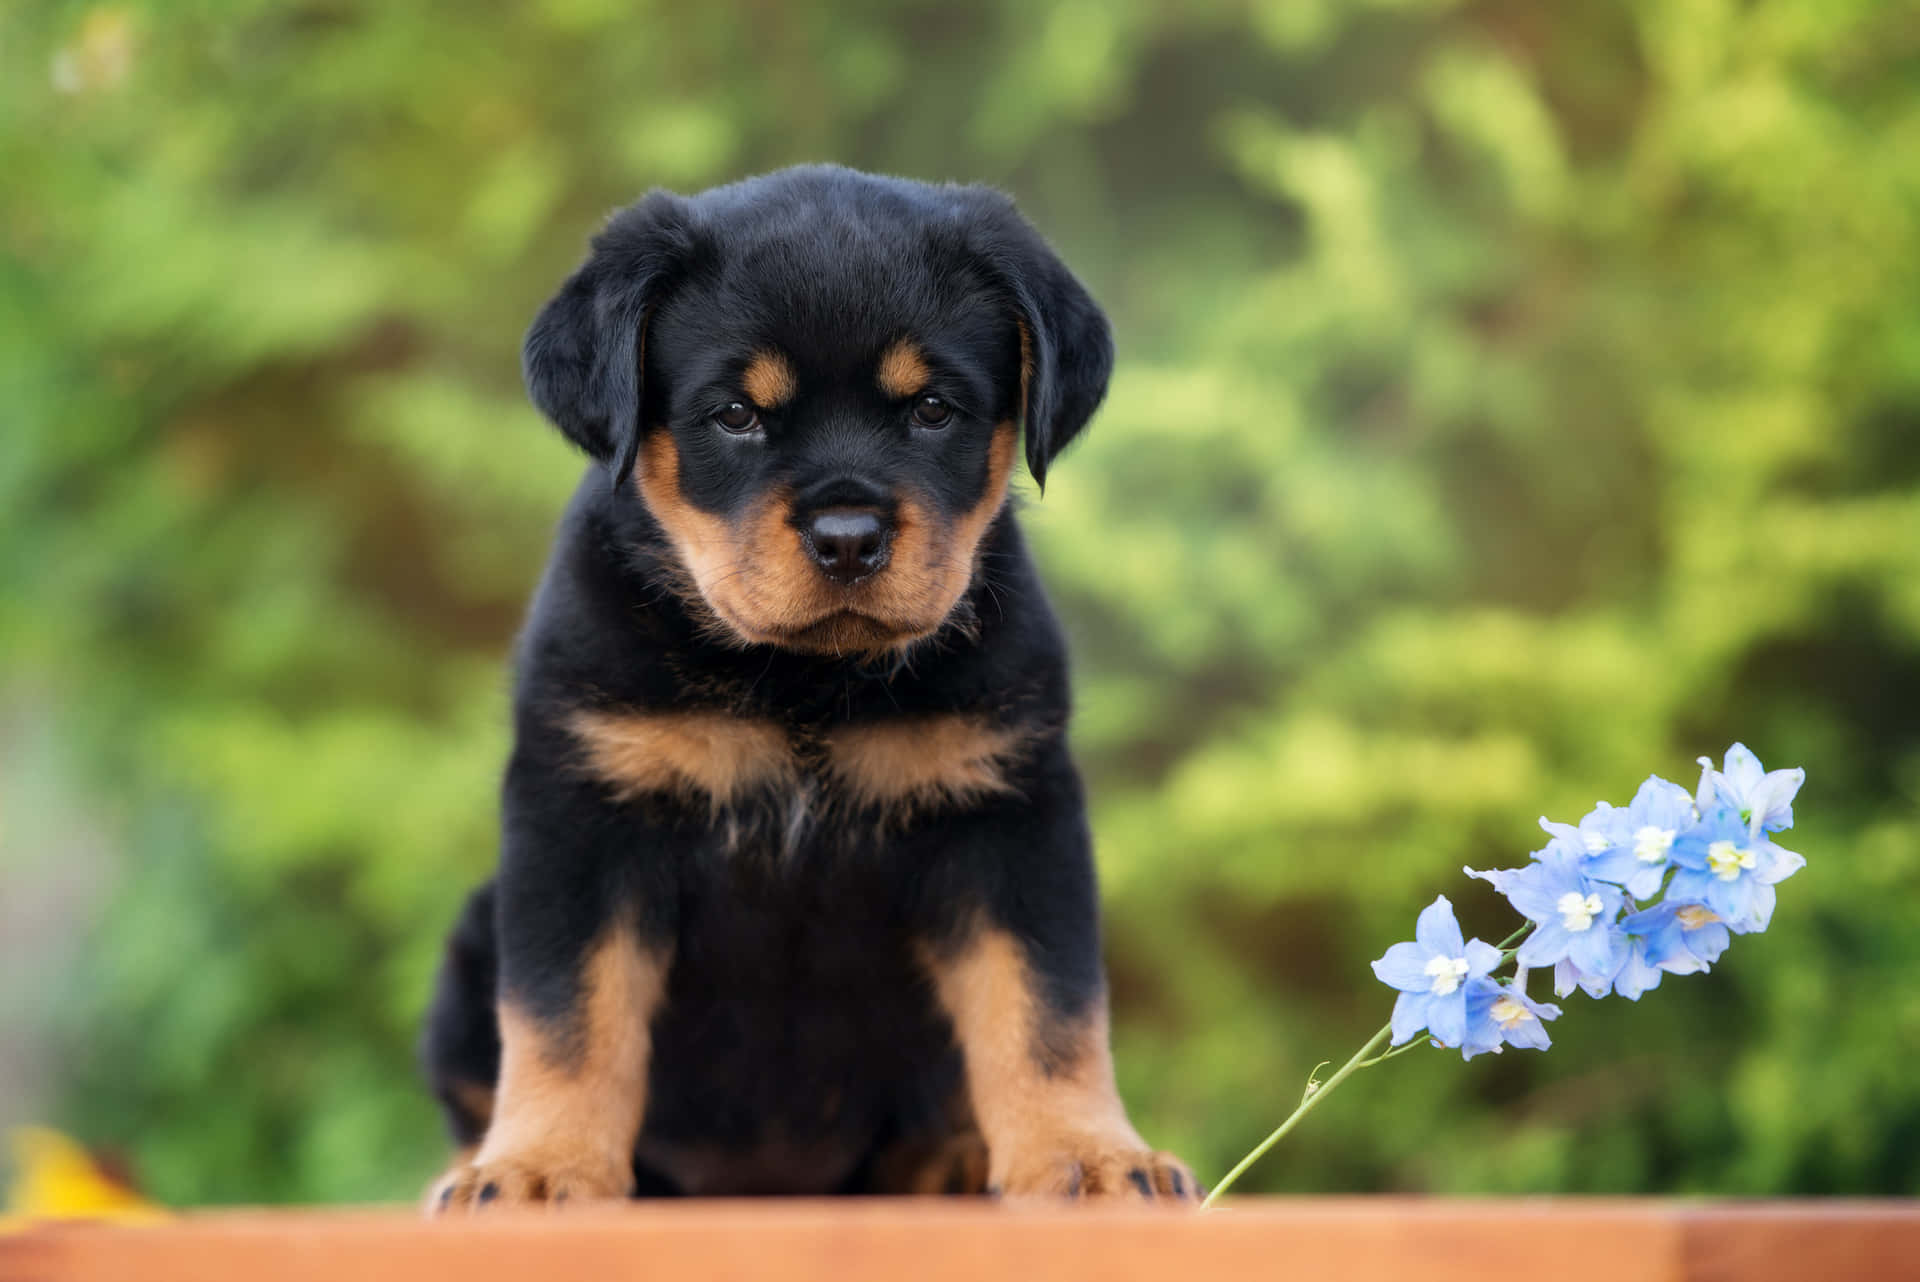 Adorable Rottweiler pup